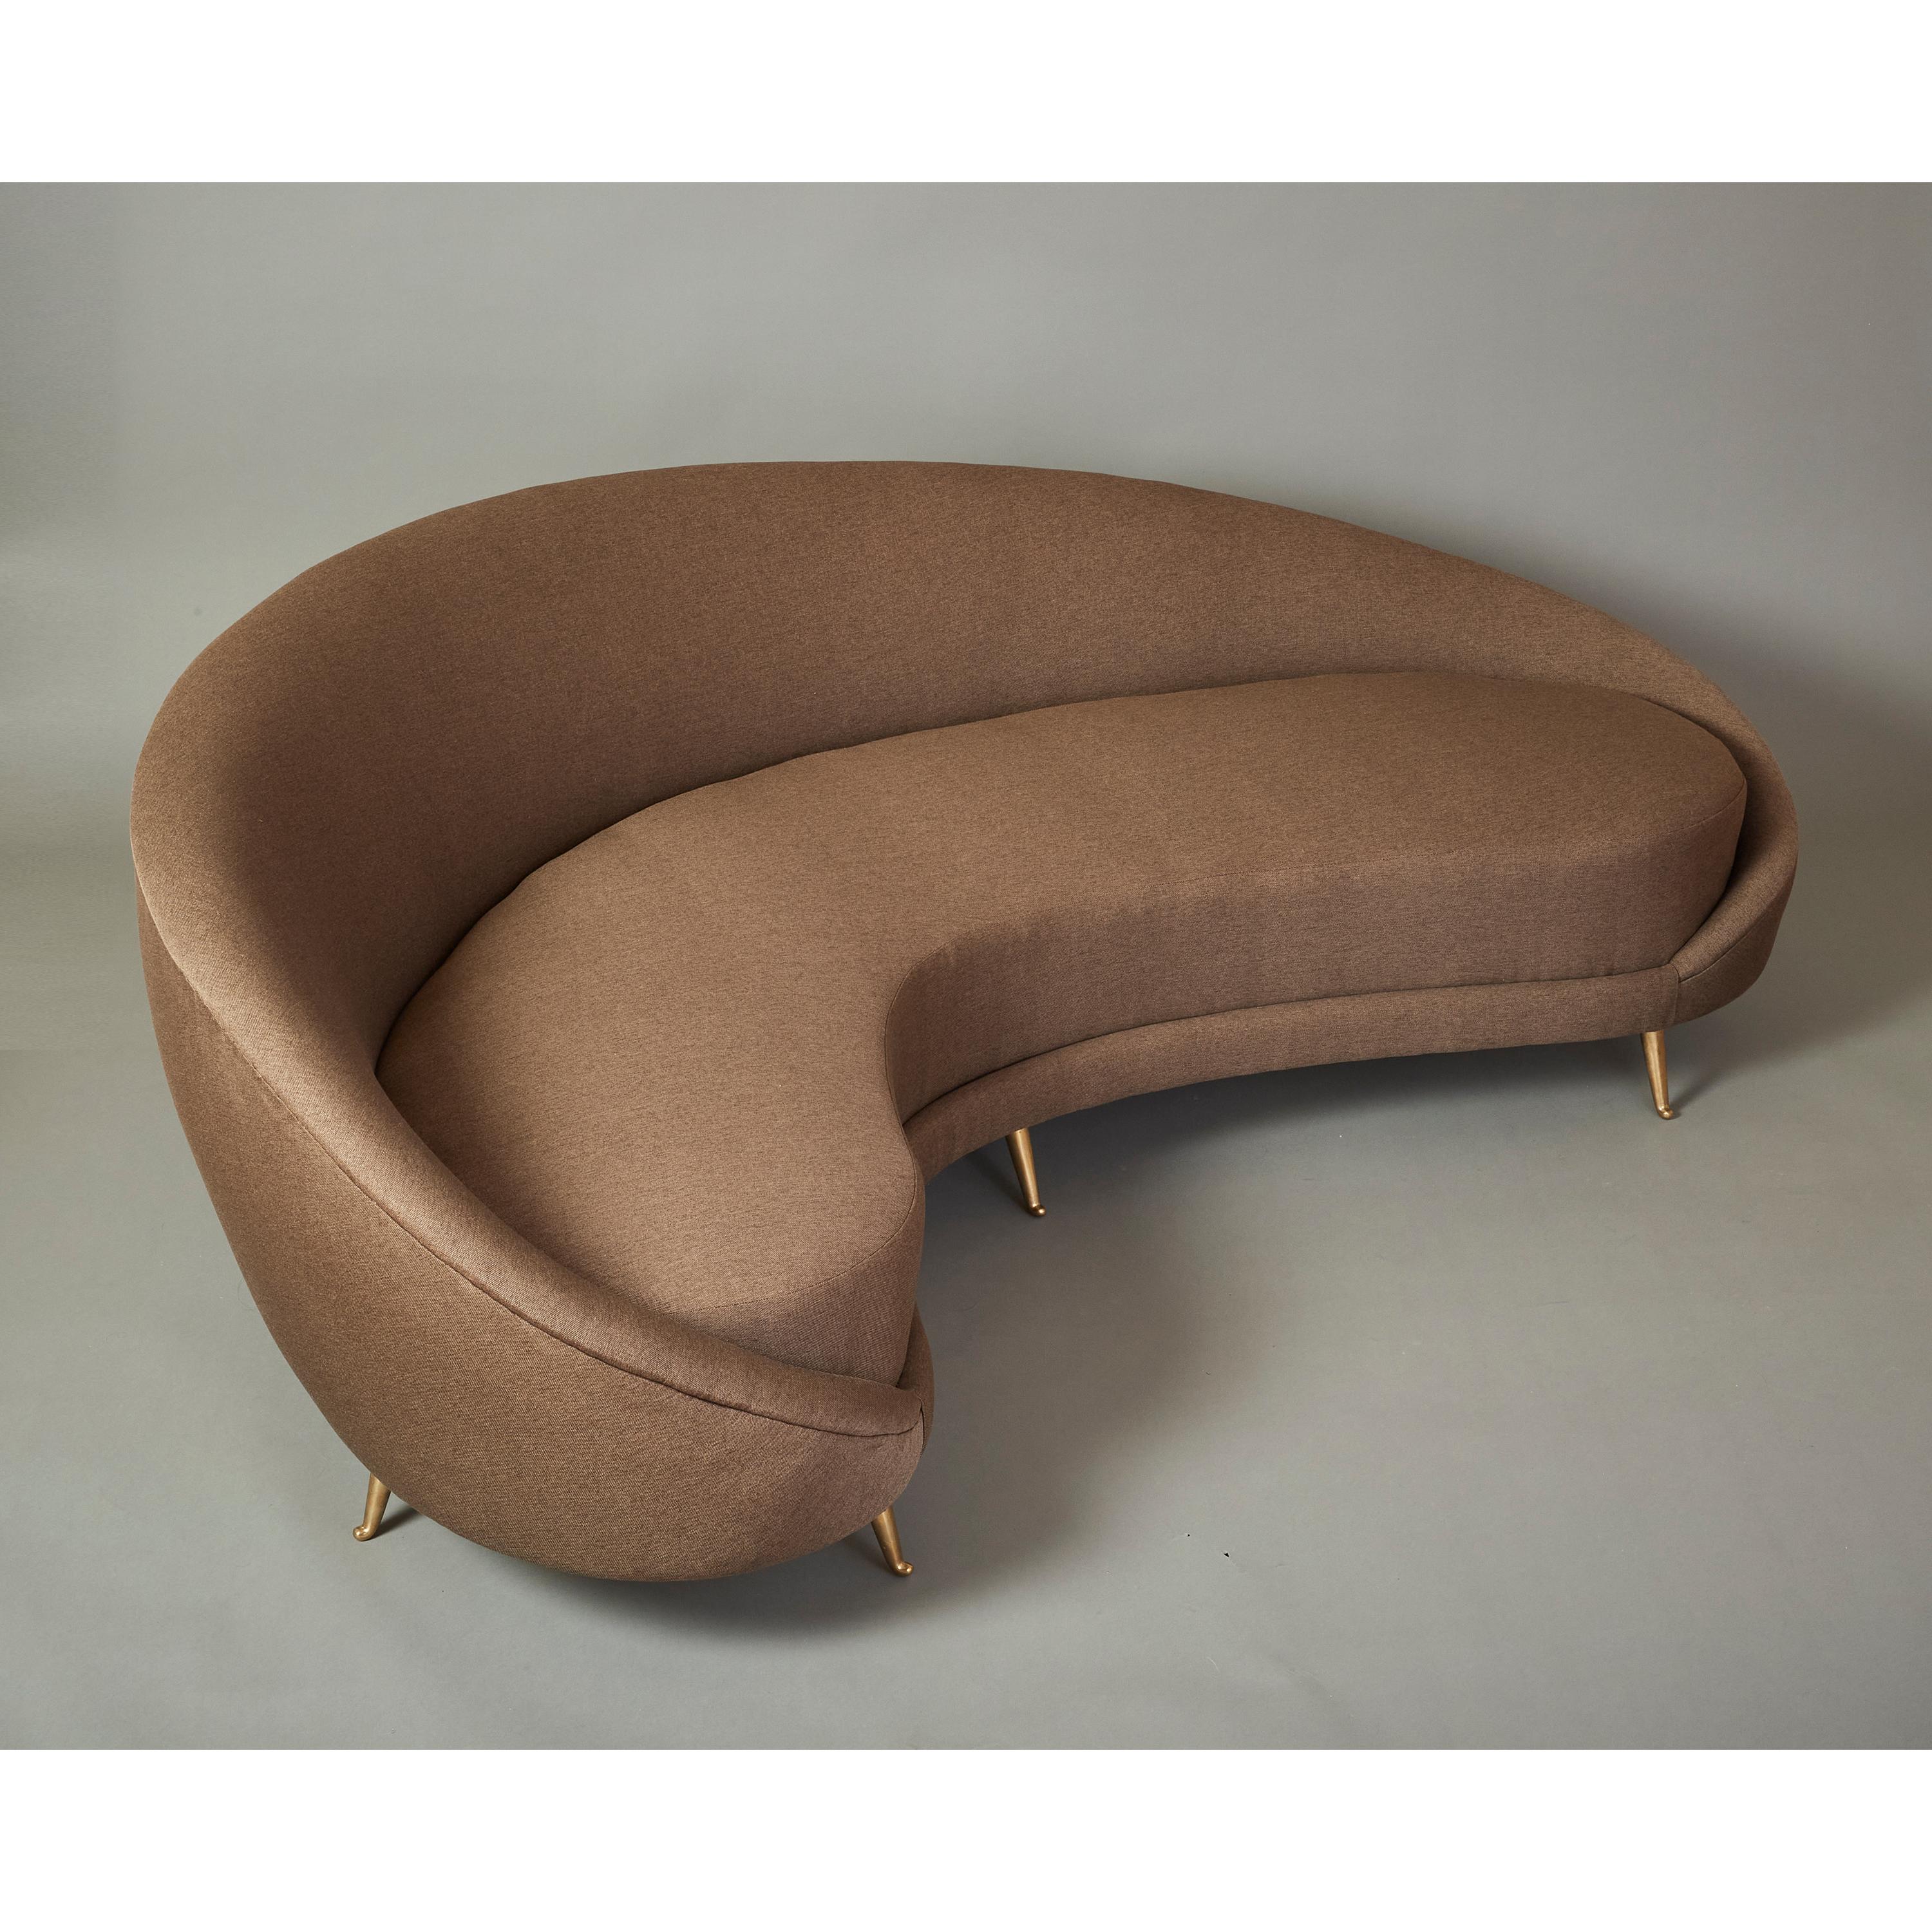 Federico Munari Curved Boomerang Sofa with Polished Brass Legs, Italy 1950's For Sale 6